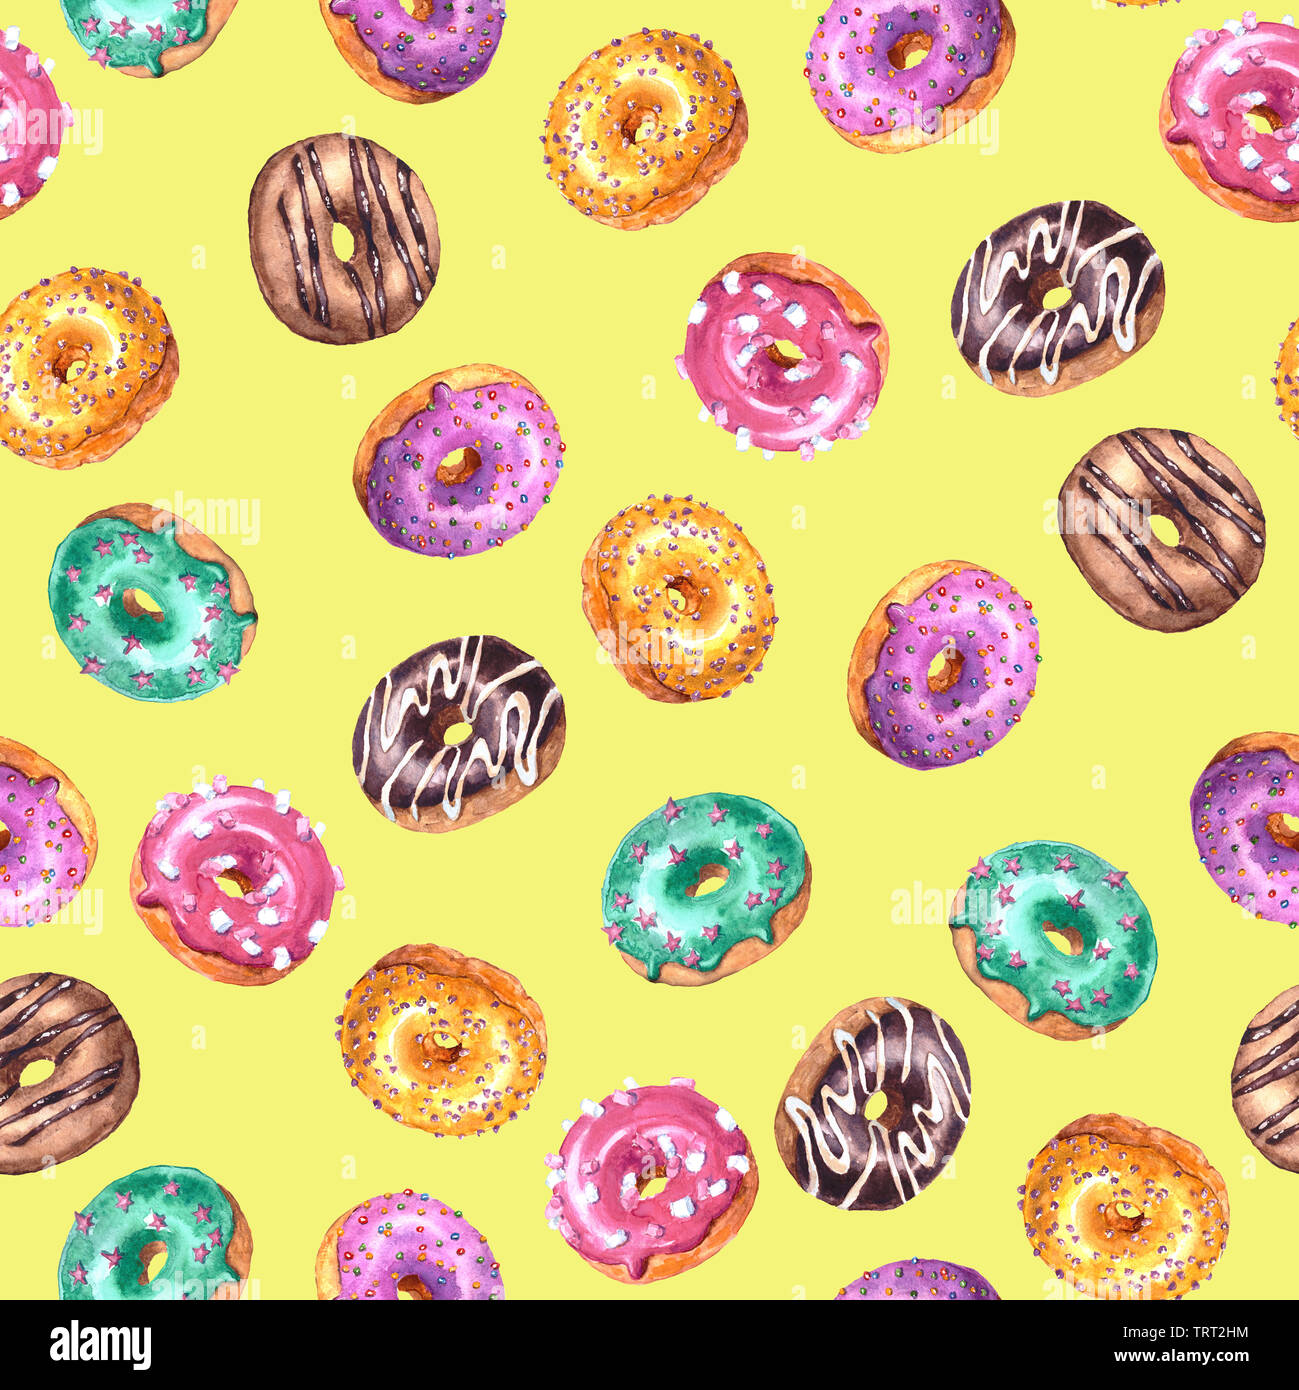 Set of watercolor hand drawn sketch illustration of colorful glazed donuts isolated on yellow background. Seamless pattern Stock Photo